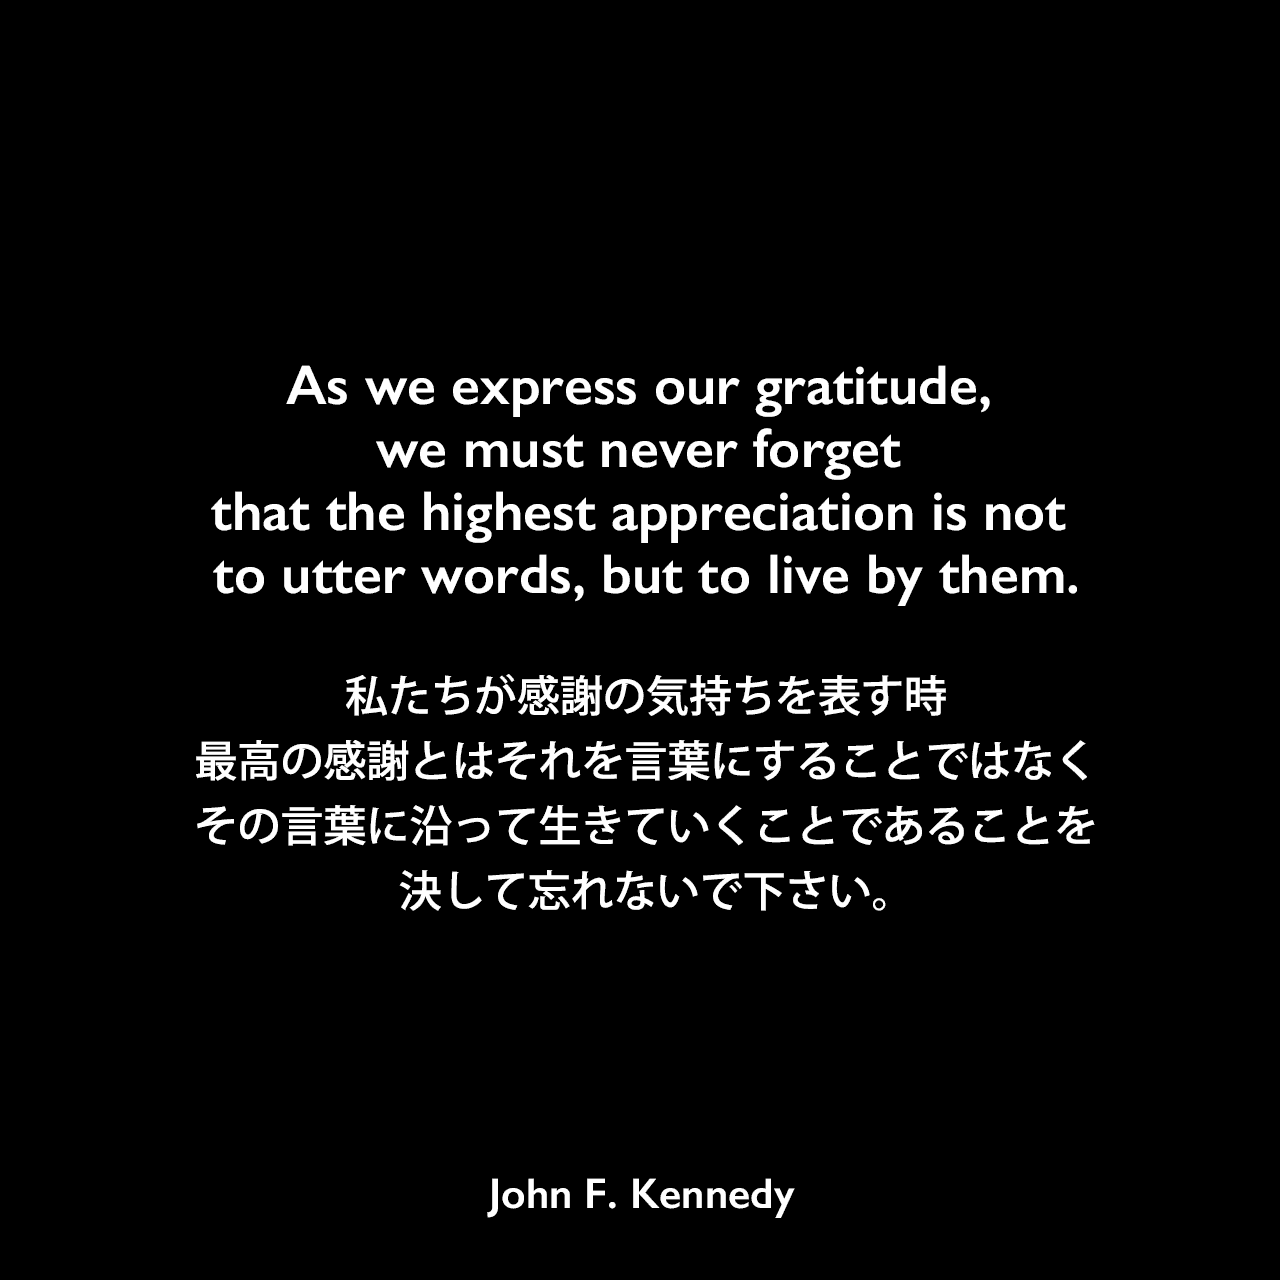 As we express our gratitude, we must never forget that the highest appreciation is not to utter words, but to live by them.私たちが感謝の気持ちを表す時、最高の感謝とはそれを言葉にすることではなく、その言葉に沿って生きていくことであることを決して忘れないで下さい。- 1963年サンクスギヴィングデーでの宣言よりJohn F Kennedy